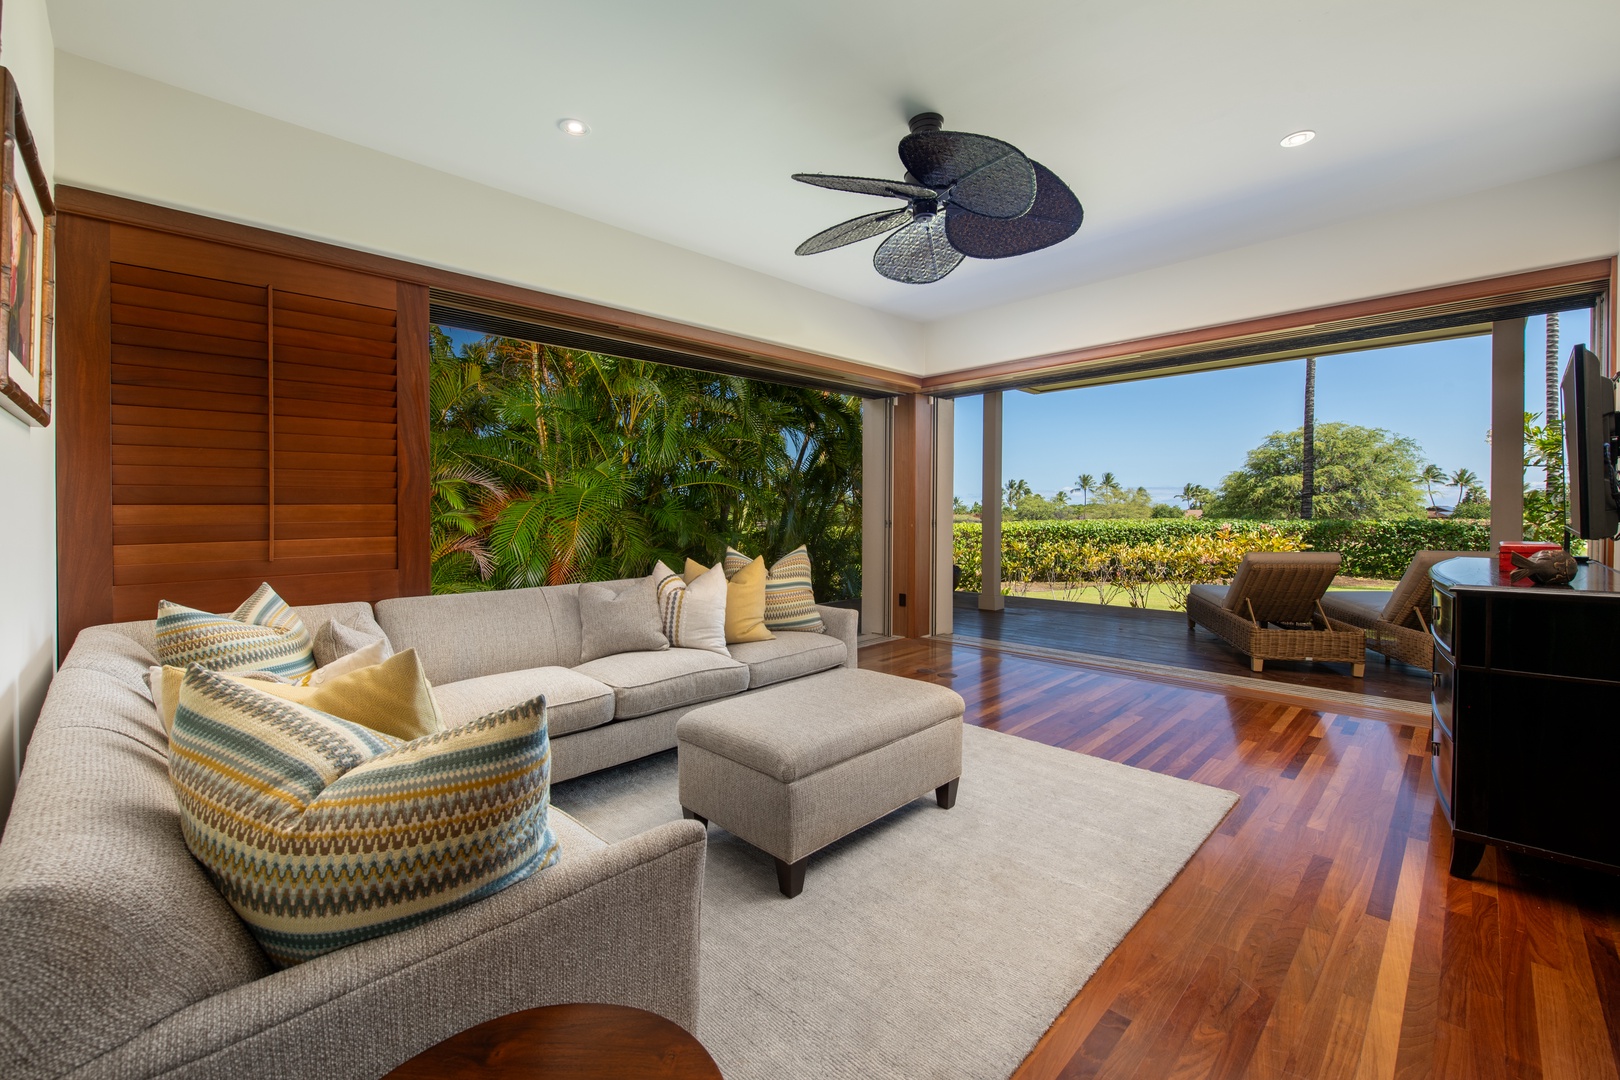 Kailua Kona Vacation Rentals, 3BD Ka'Ulu Villa (109A) at Four Seasons Resort at Hualalai - Lounge in luxury! Elegant and open interior design and chic plush seating in the lounge area adjacent to the primary suite.